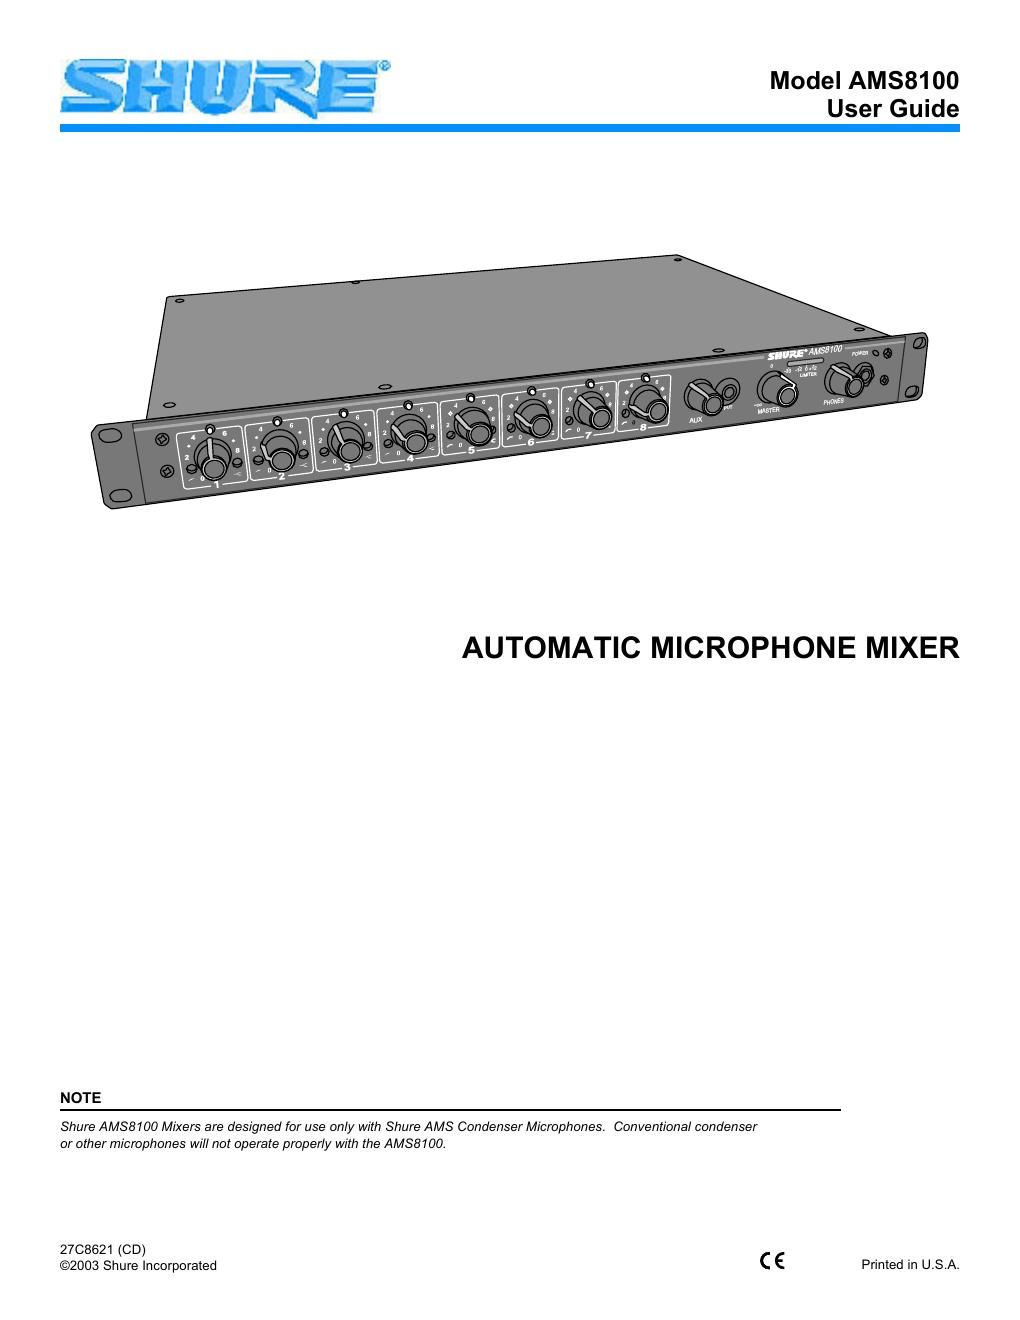 shure ams8100 owners manual